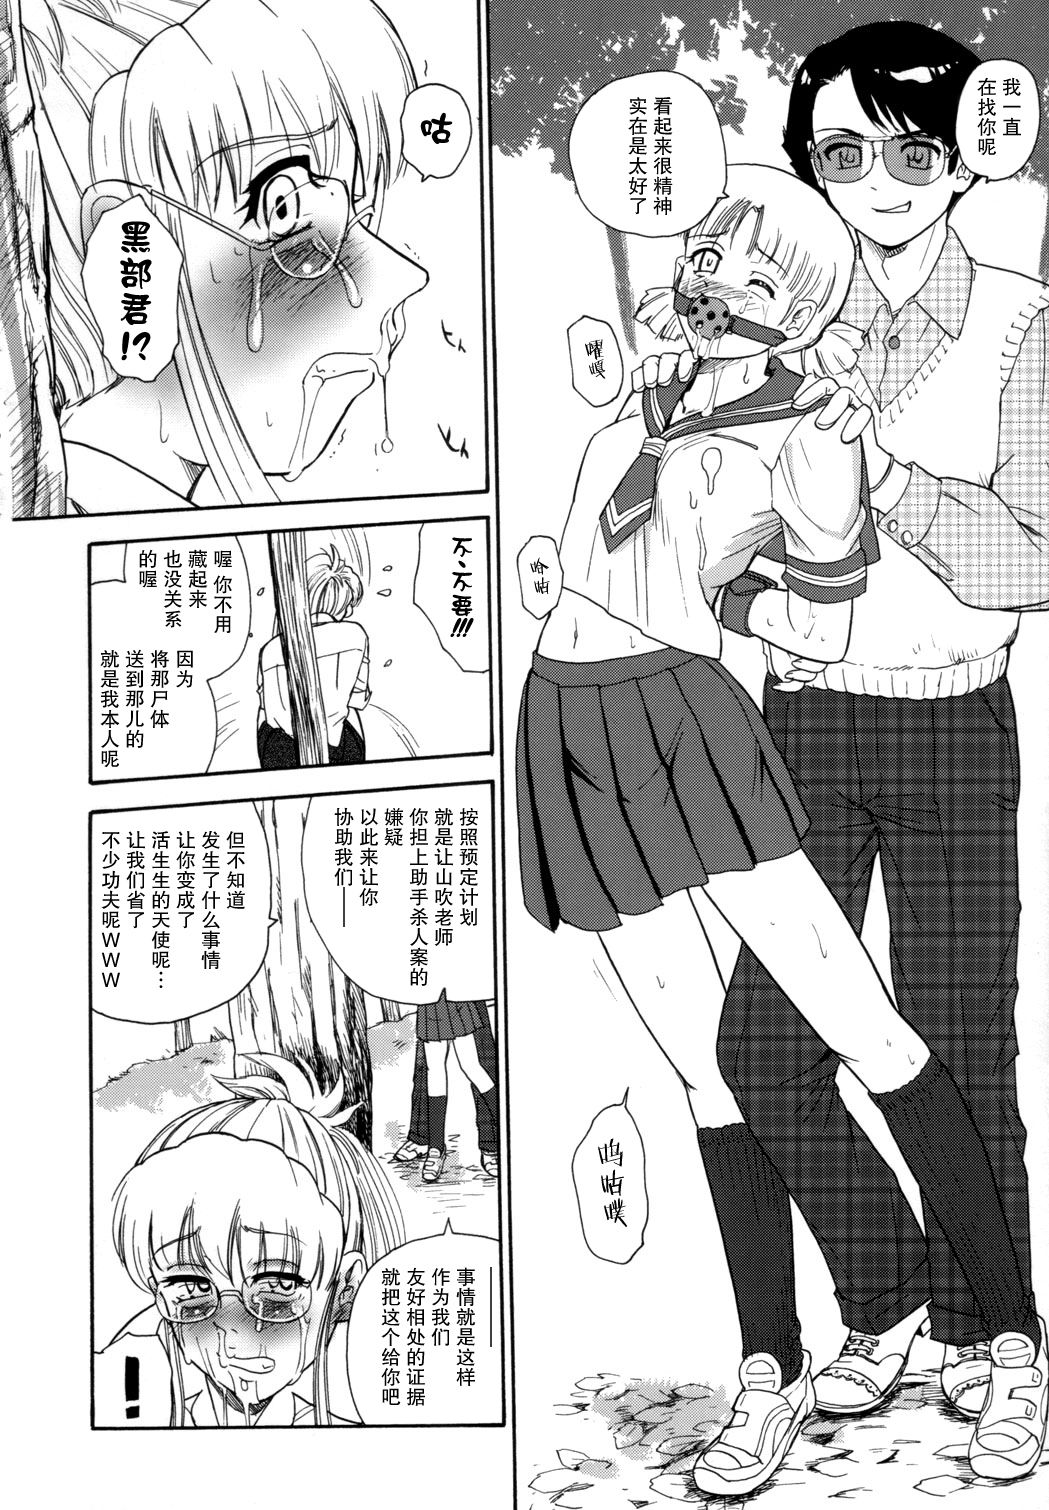 (C72) [Behind Moon (Q)] Dulce Report 9 | 达西报告 9 [Chinese] [哈尼喵汉化组] [Decensored] page 40 full